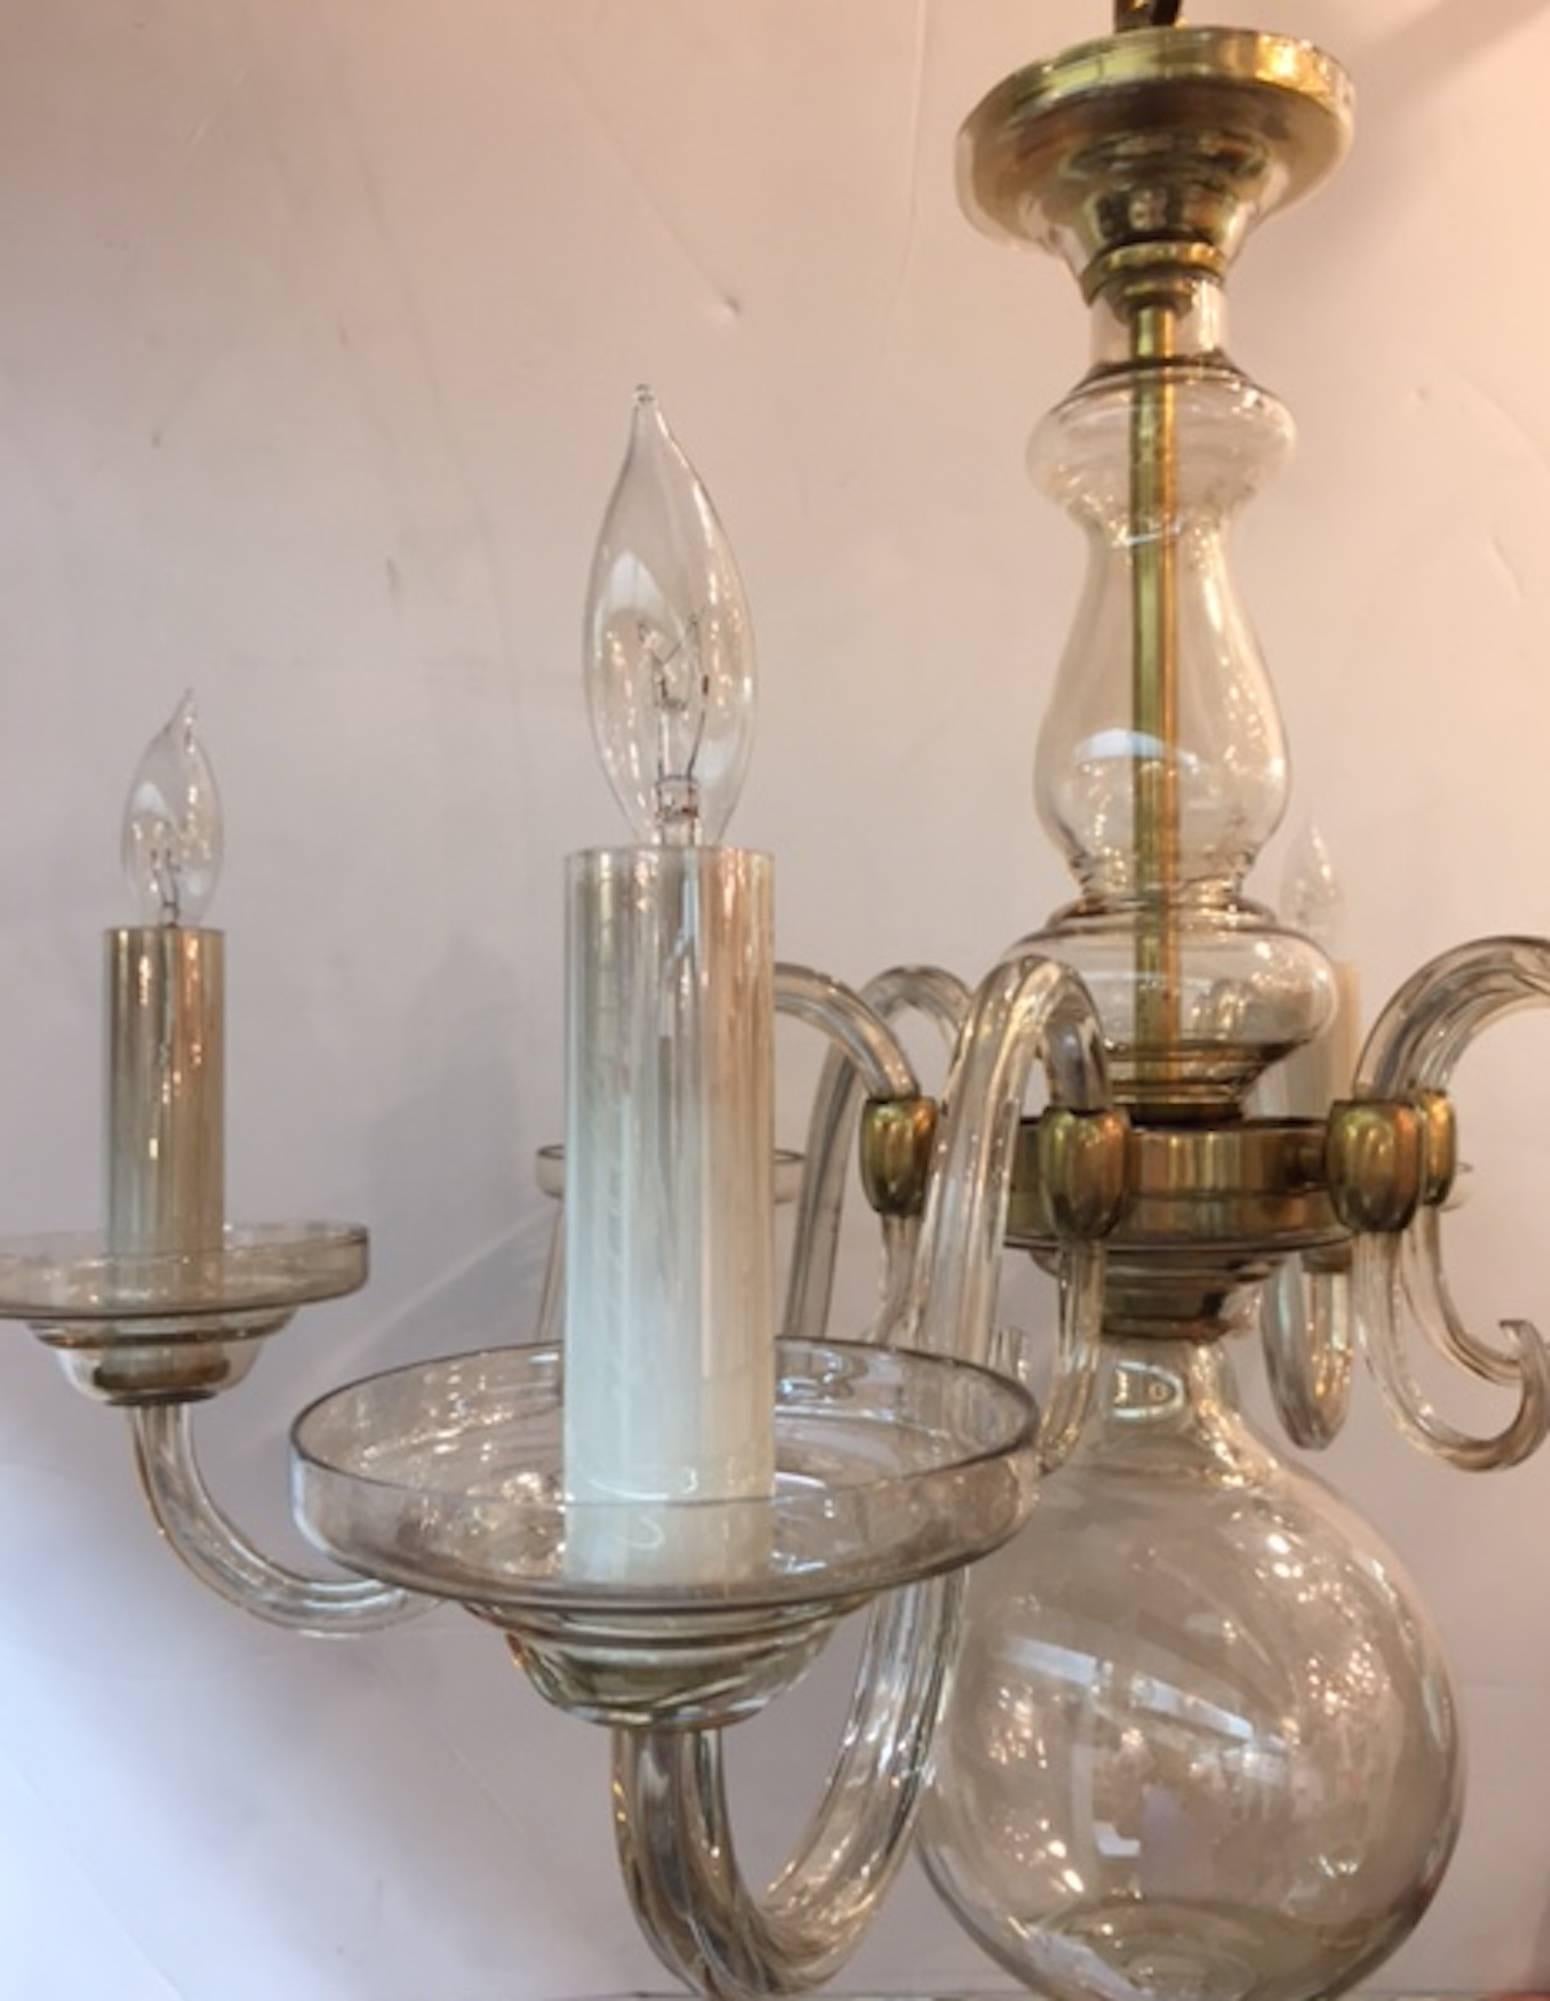 A lovely classical style six arm chandelier of iridescent pale champagne color. Each piece handblown in Murano, Italy, circa 1950. All original with matching blown glass candle socket covers. Light iridescent finish to glass. Satin finish brass